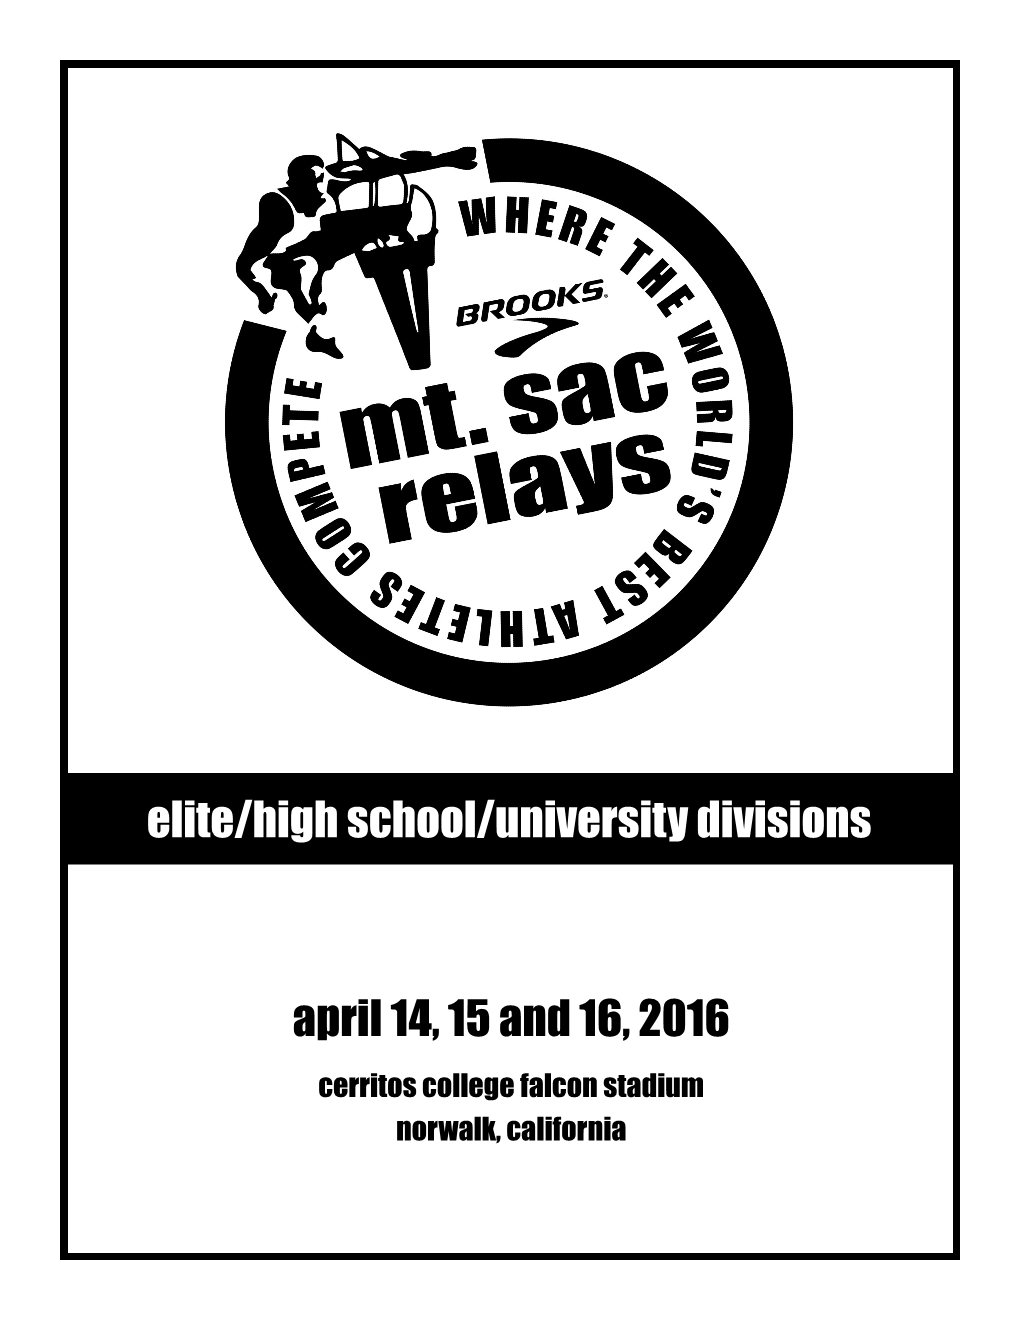 April 14, 15 and 16, 2016 Elite/High School/University Divisions